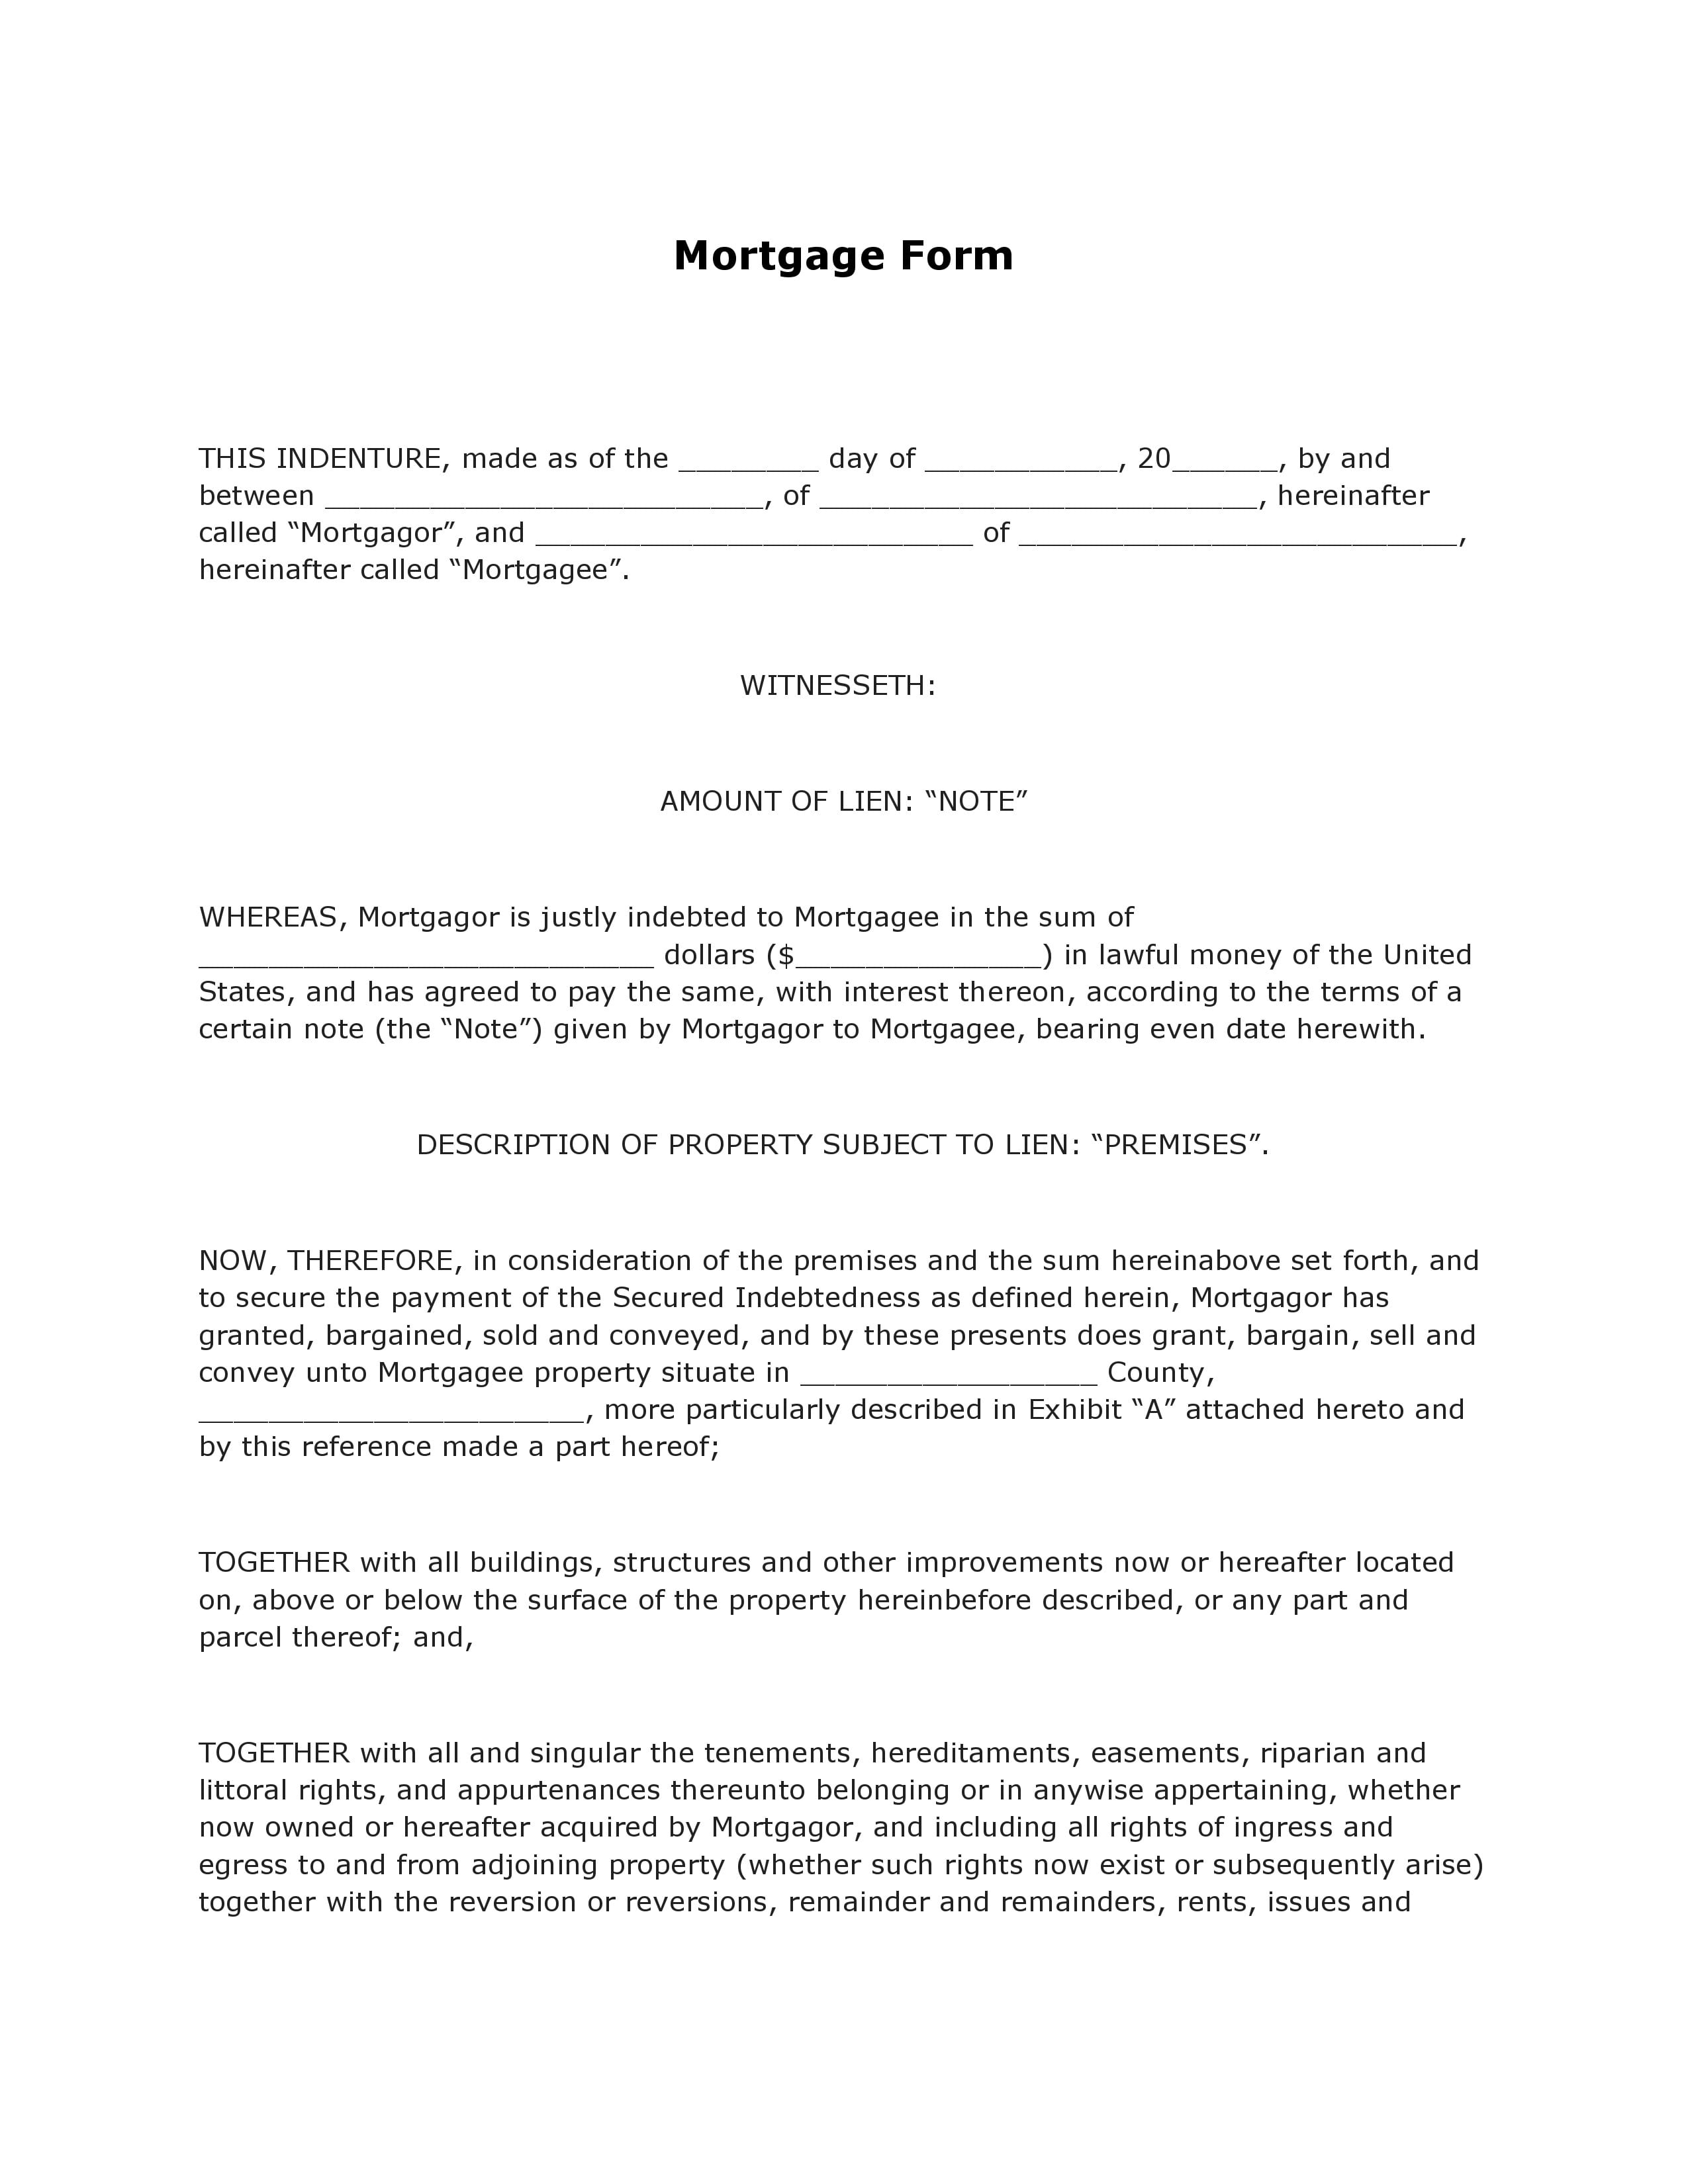 fillable-legal-forms-mortgage-printable-forms-free-online